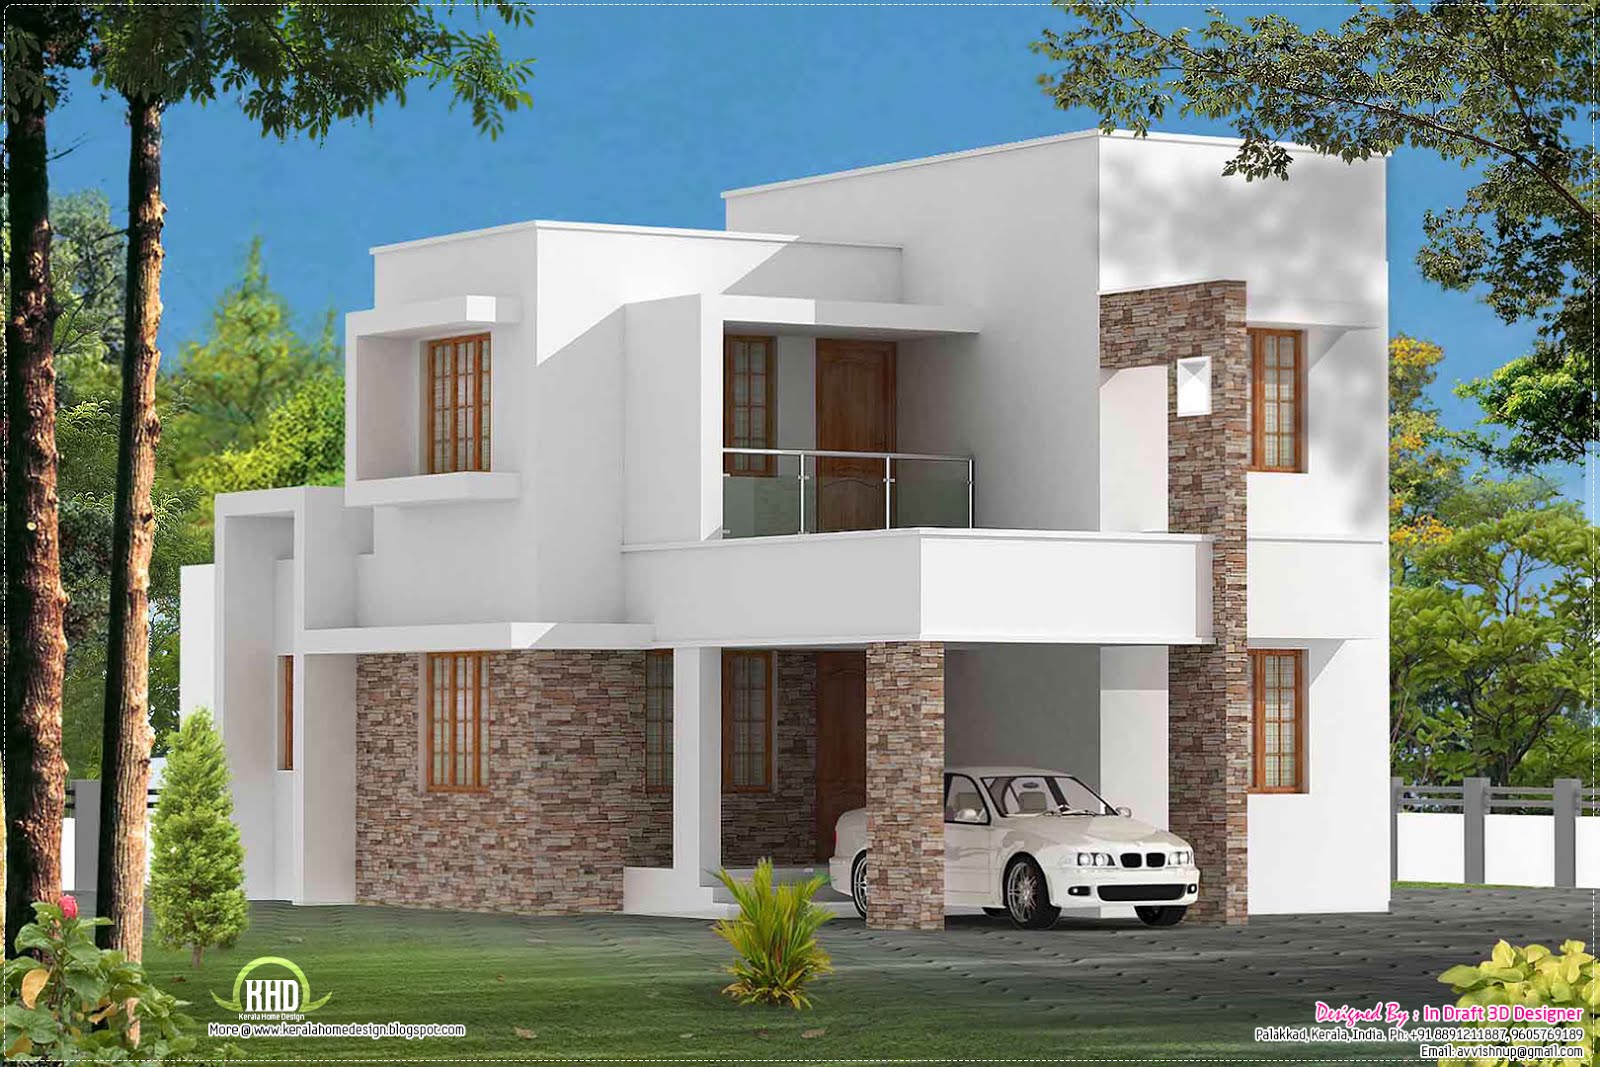 bungalow house design pictures 25760 wallpapers bungalow house design